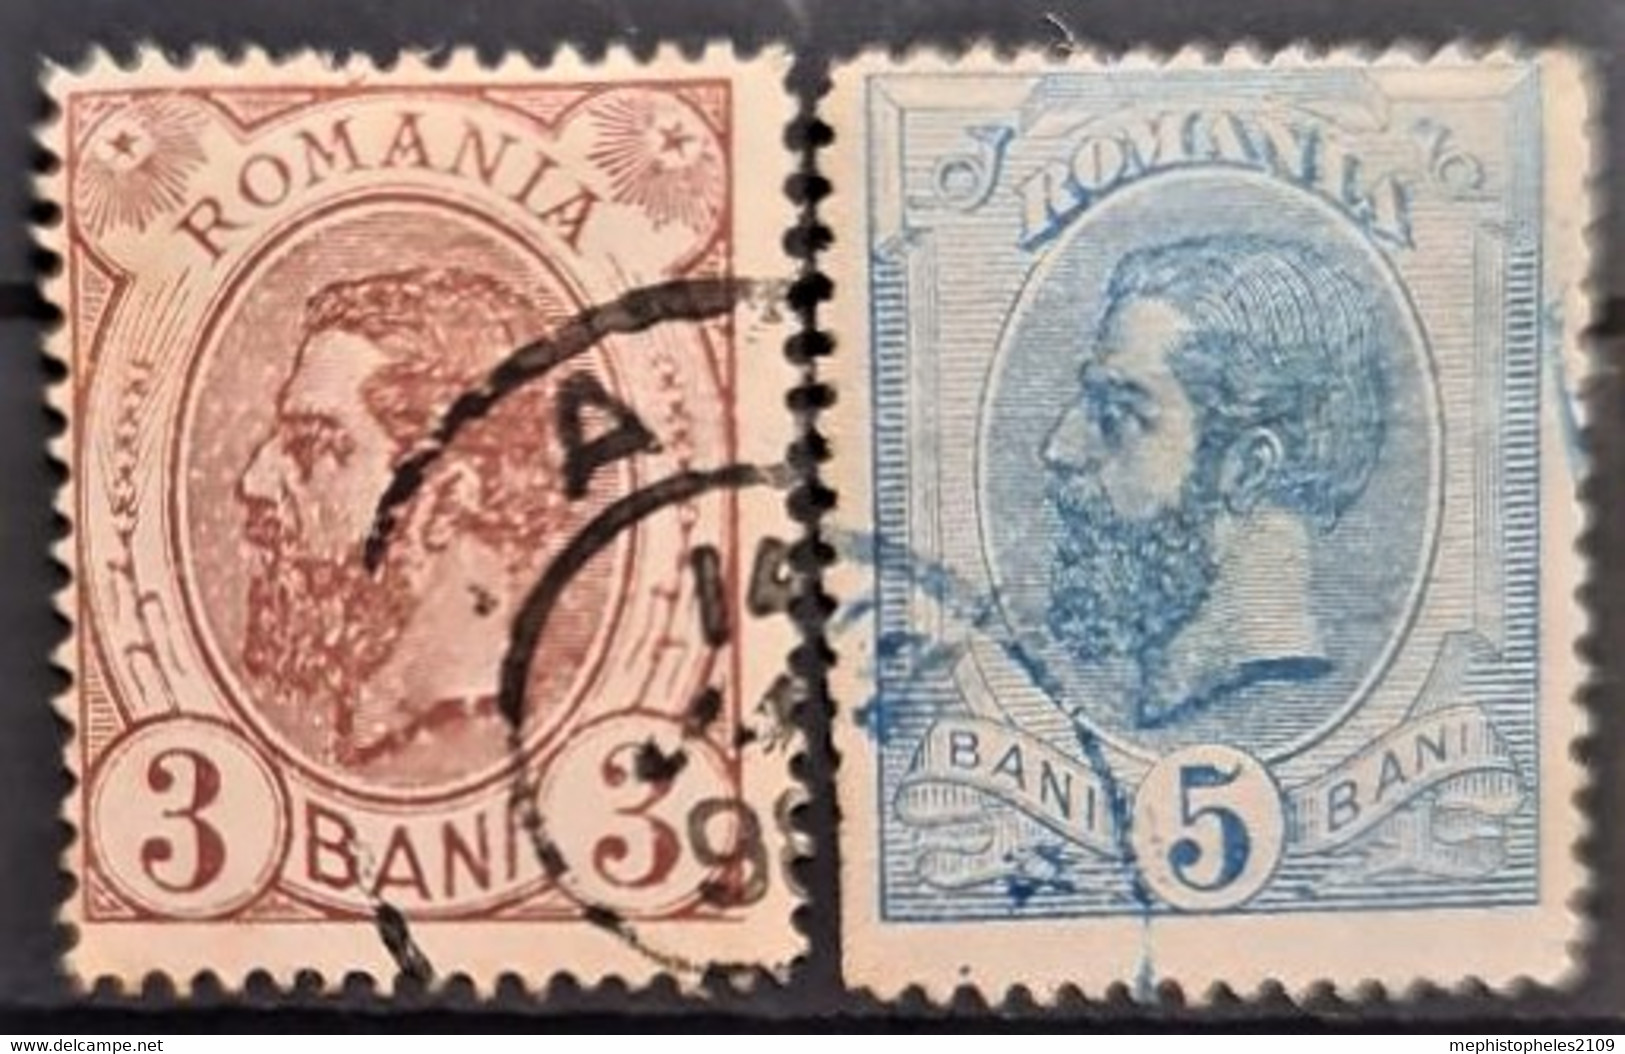 ROMANIA 1893 - Canceled - Sc# 119, 120 - Used Stamps